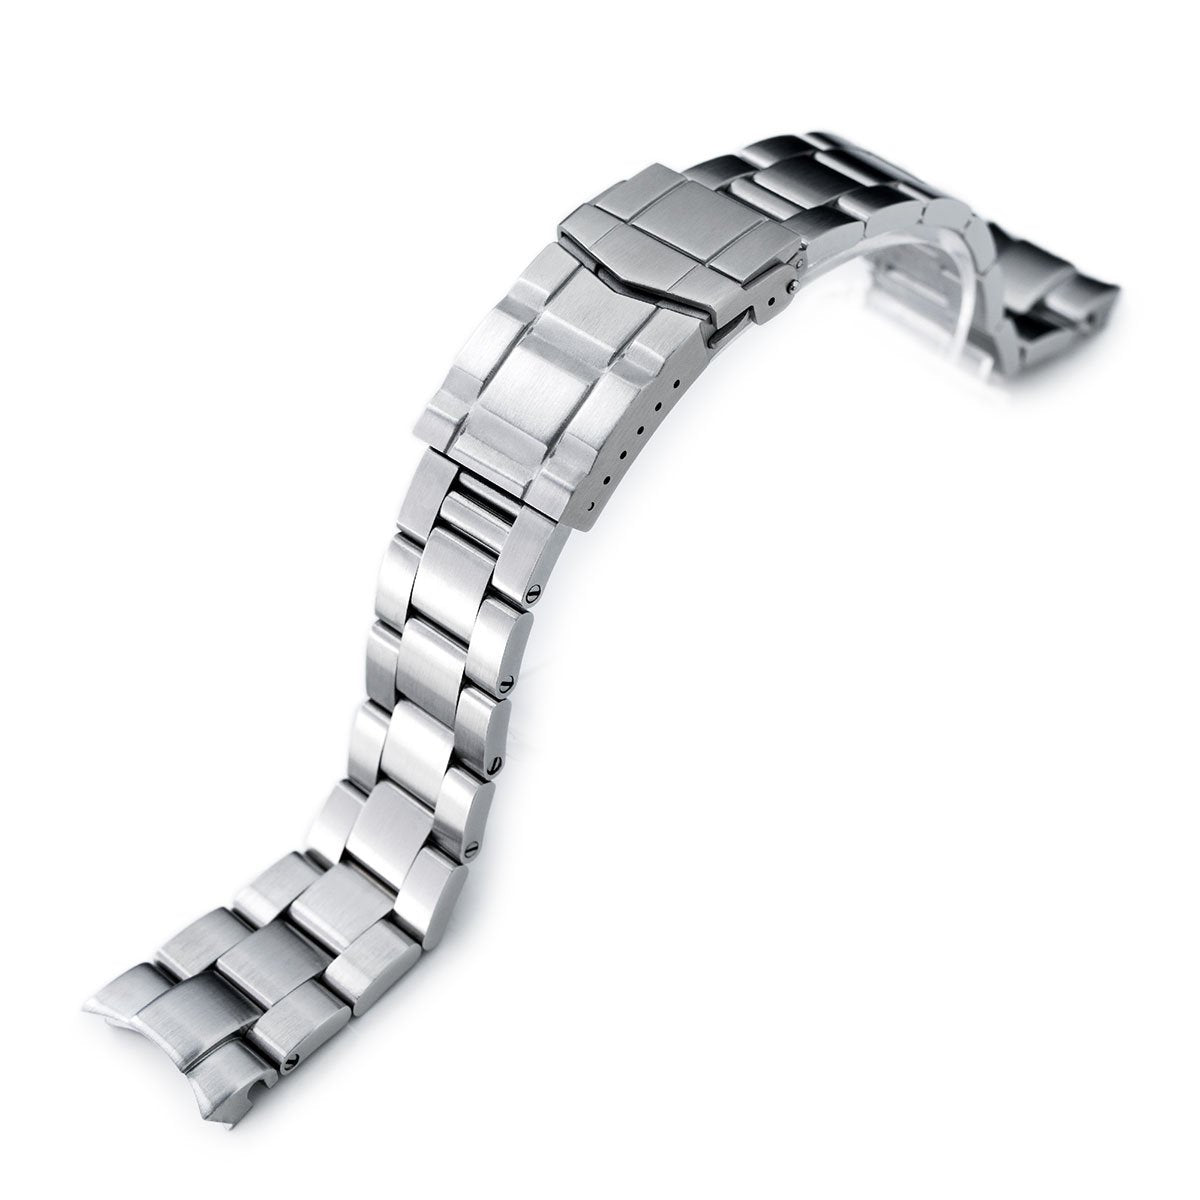 20mm Super-O Boyer watch band for Seiko Alpinist SARB017 (or Hamilton K.) Brushed Solid SUB Clasp Strapcode Watch Bands